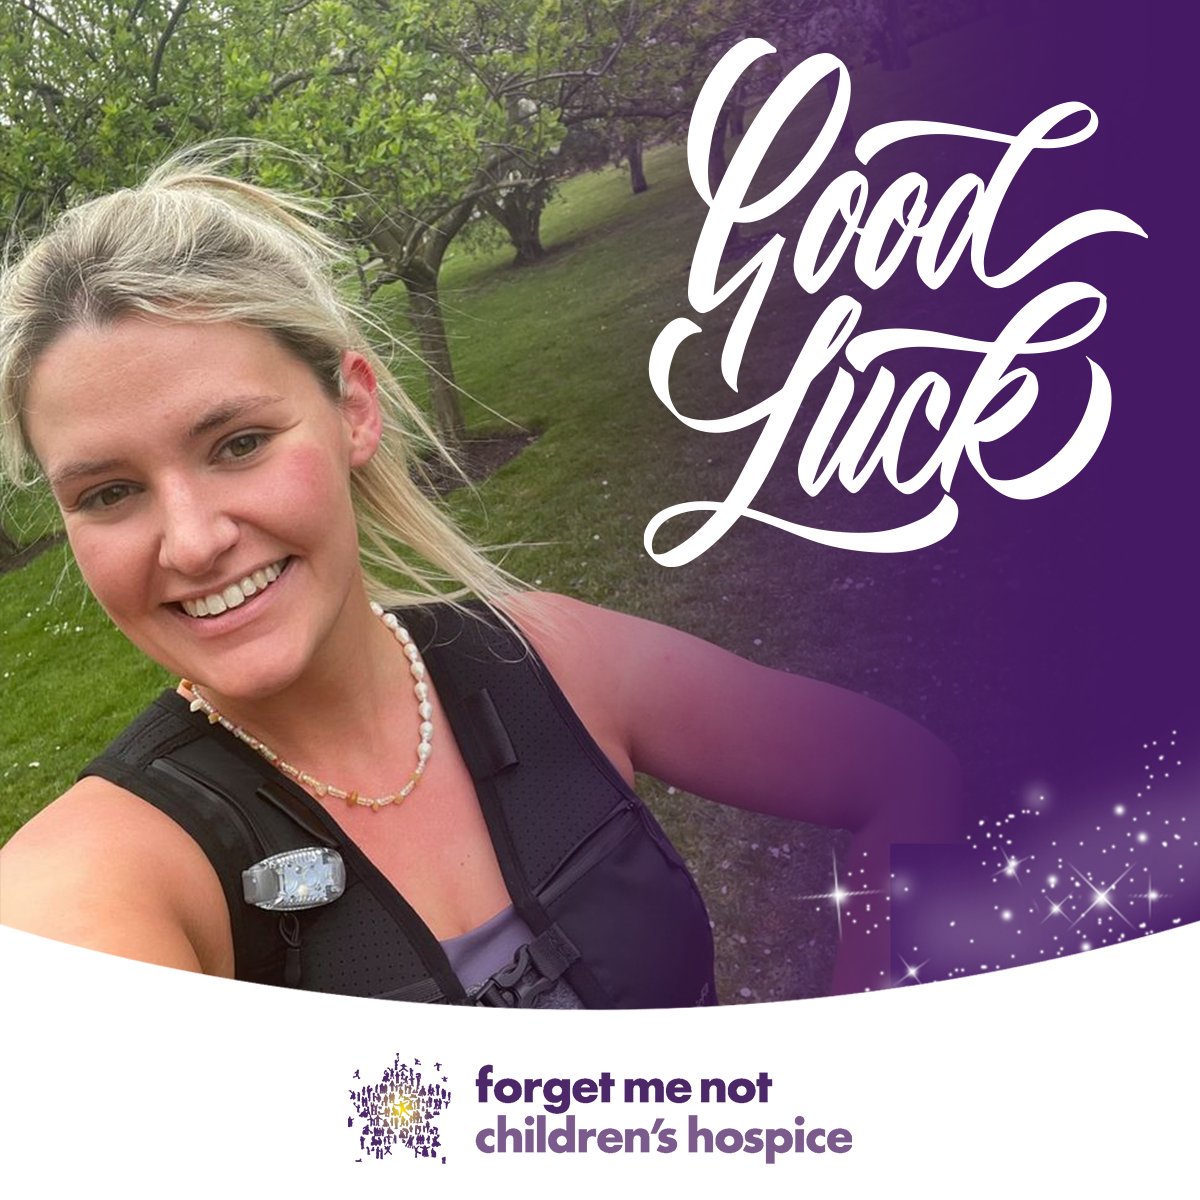 Meet Hannah who’s doing her very first running event on July 19th, all in aid of Forget Me Not 💜 She’s braving the Hackney Half Marathon and, even though she’ admits she’s not a natural runner, she’s extremely excited! You can sponsor her here: justgiving.com/page/hannah-ca…